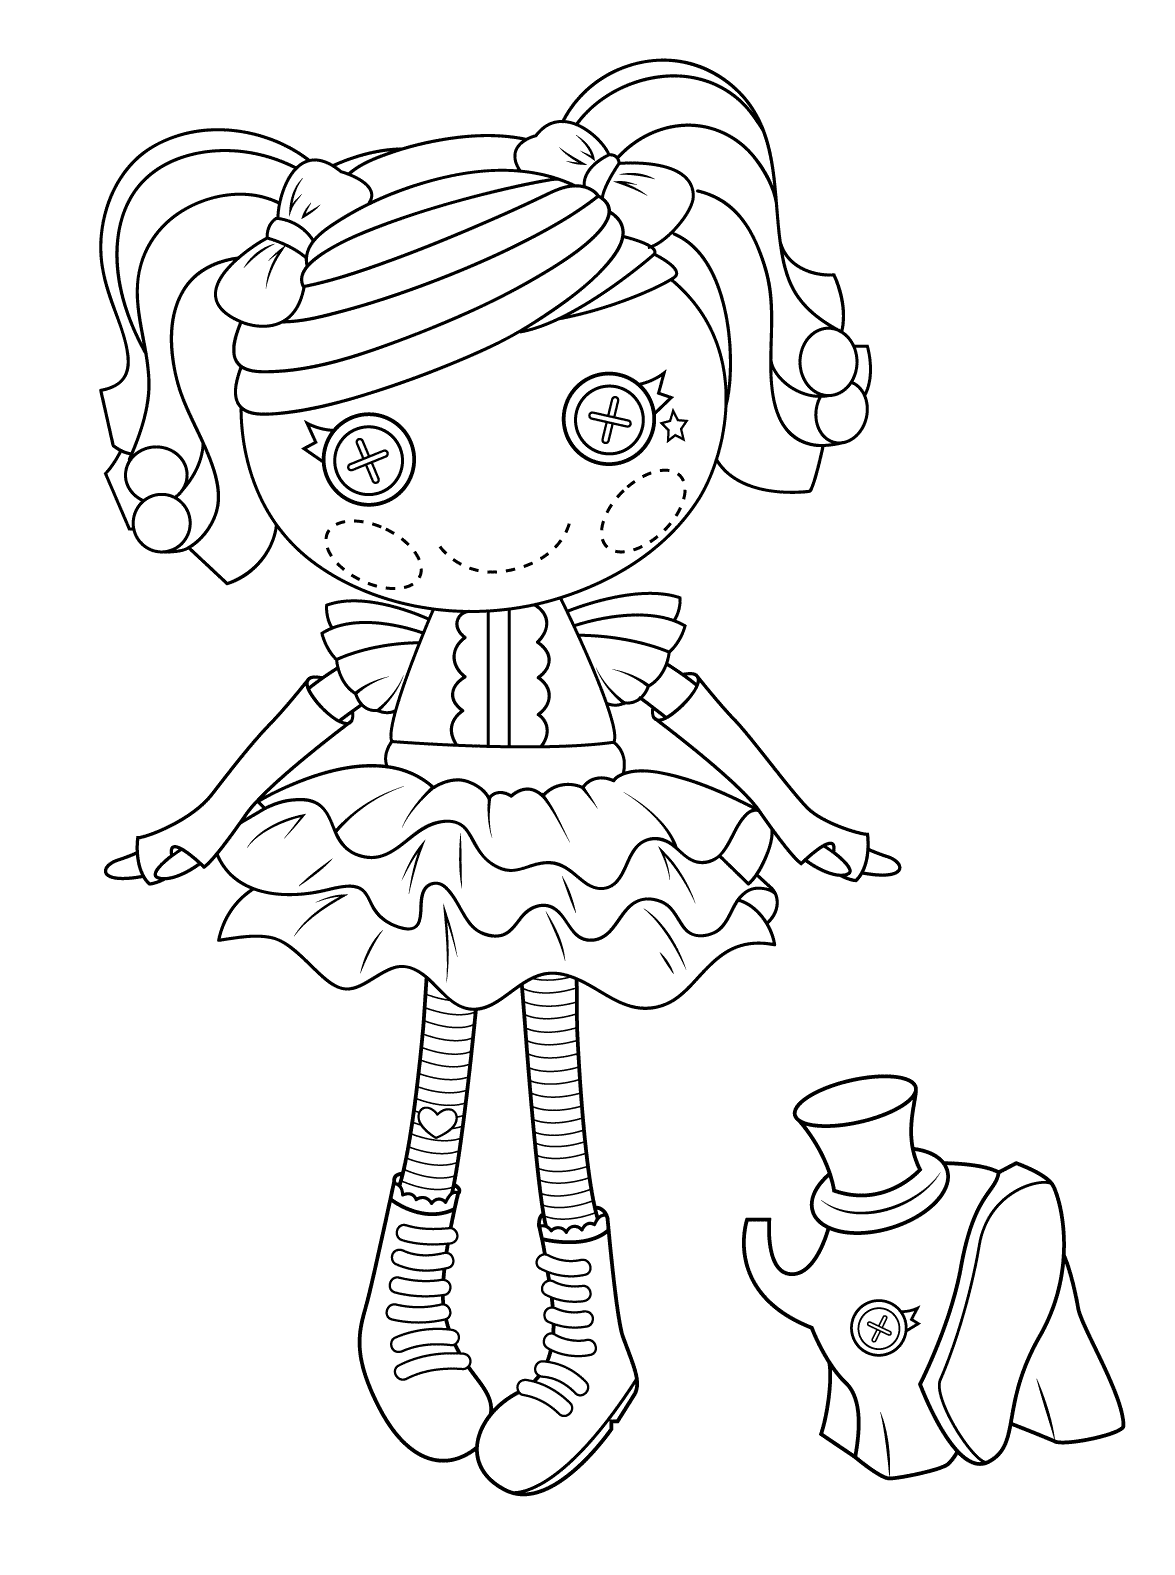 Download Doll Coloring Pages - Best Coloring Pages For Kids